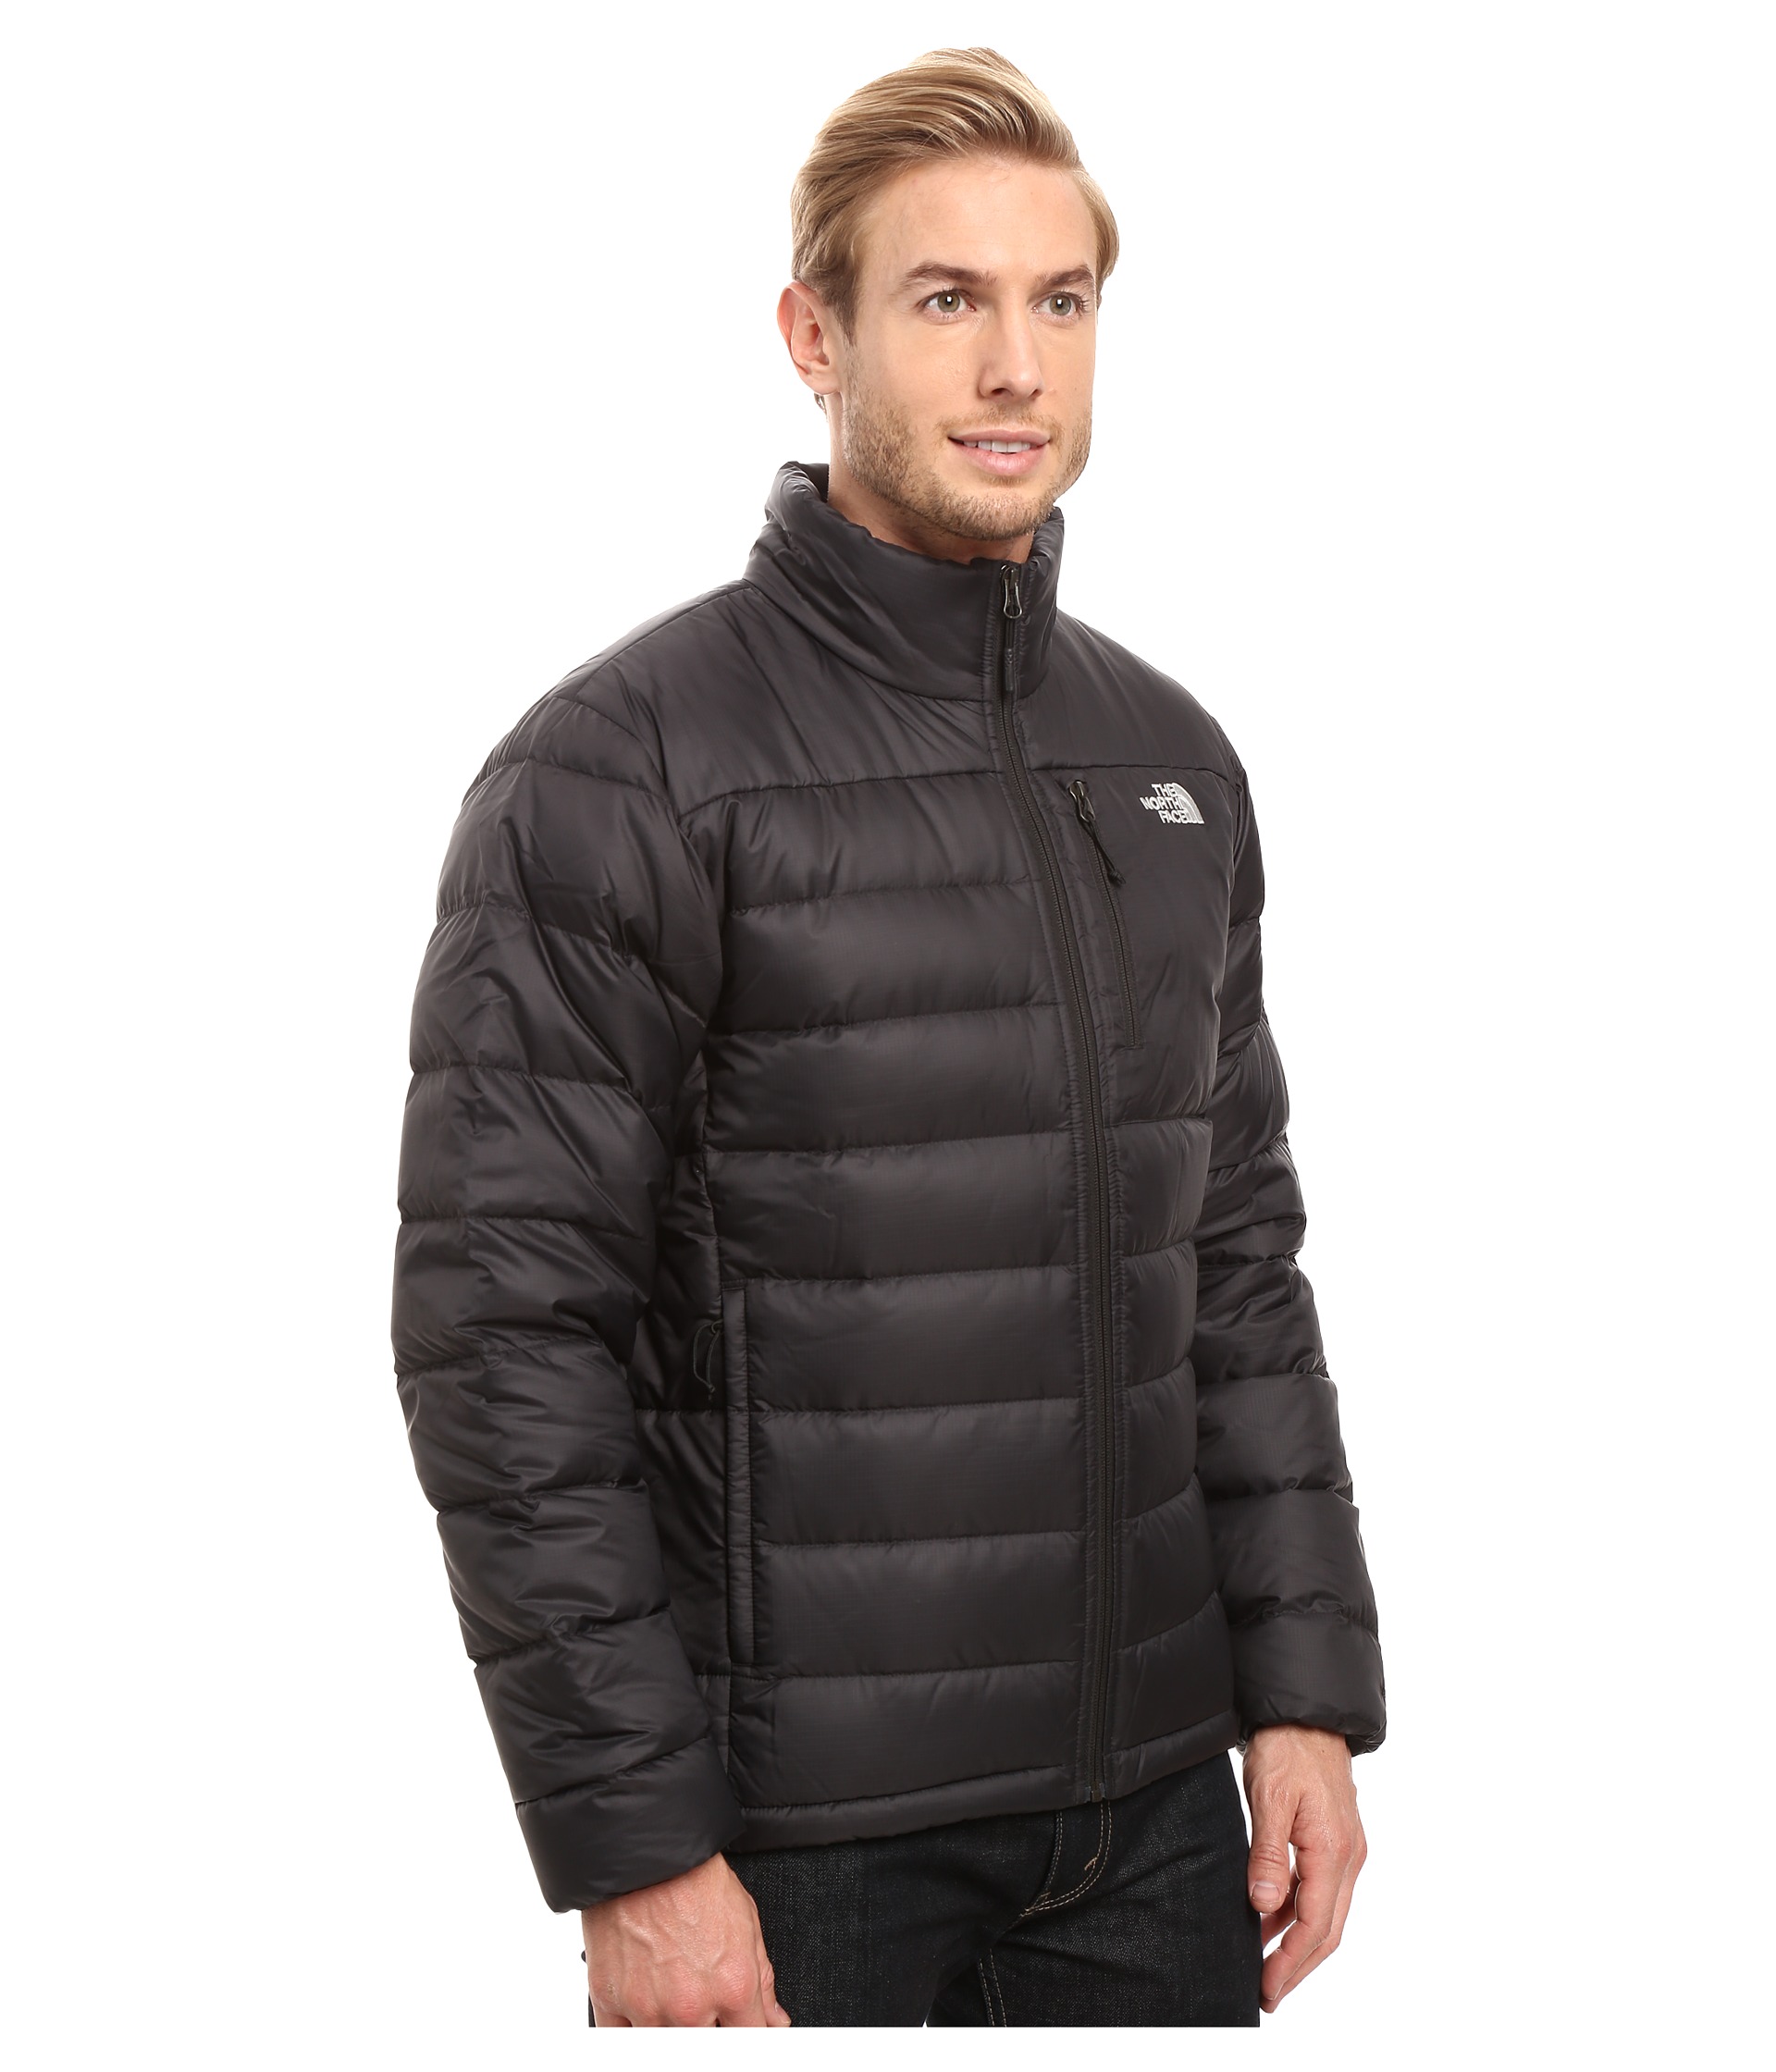 The North Face Aconcagua Jacket at Zappos.com